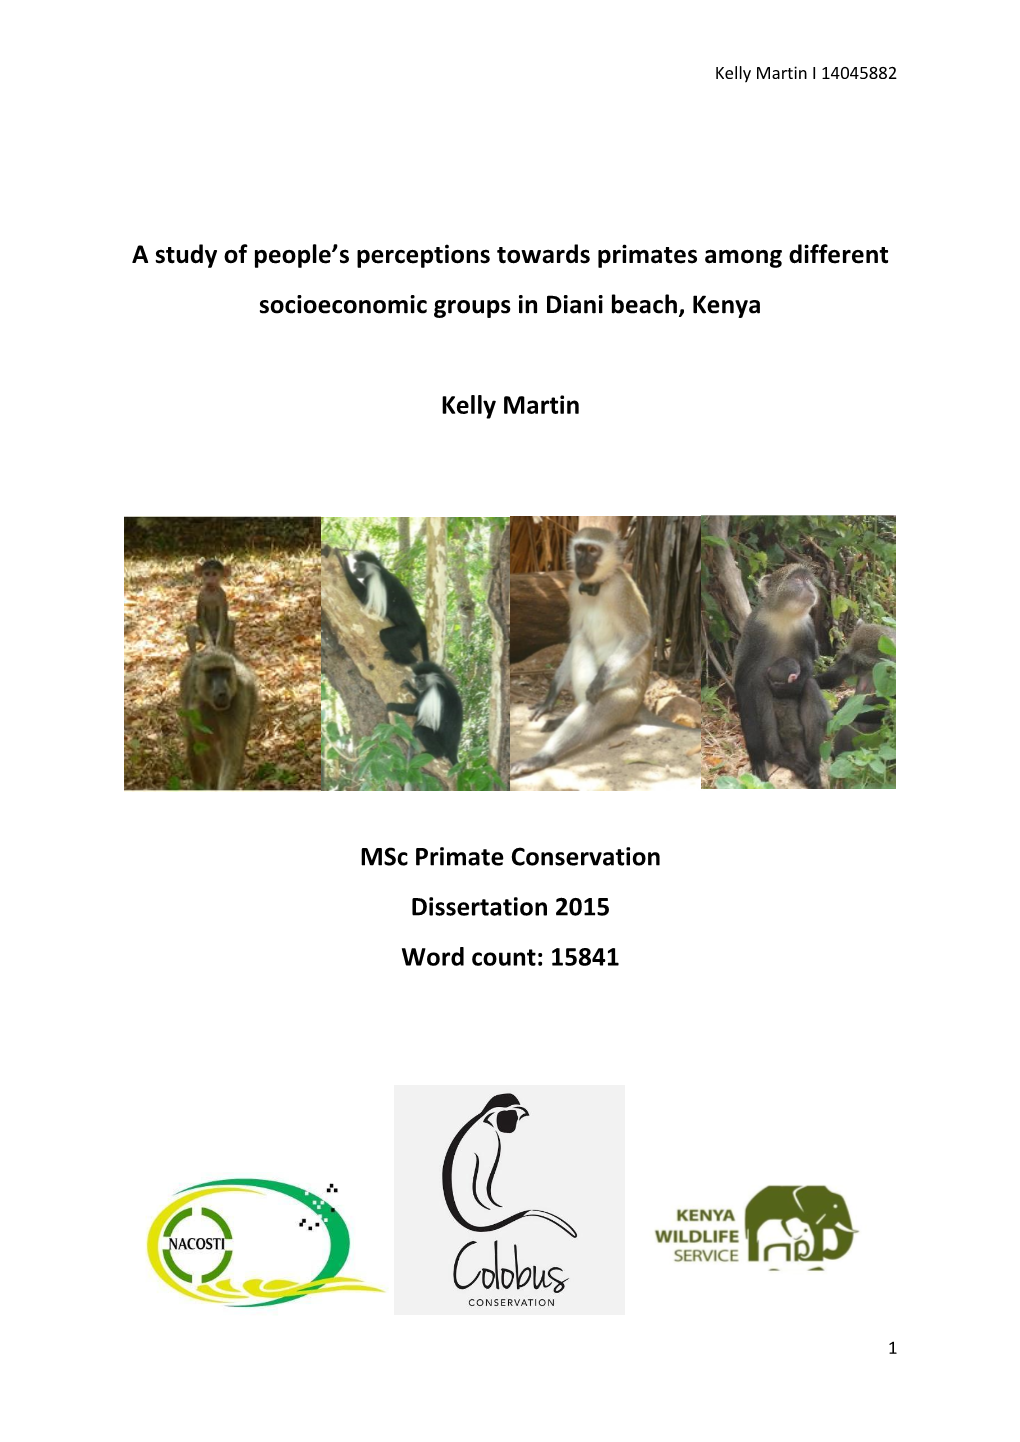 A Study of People's Perceptions Towards Primates Among Different